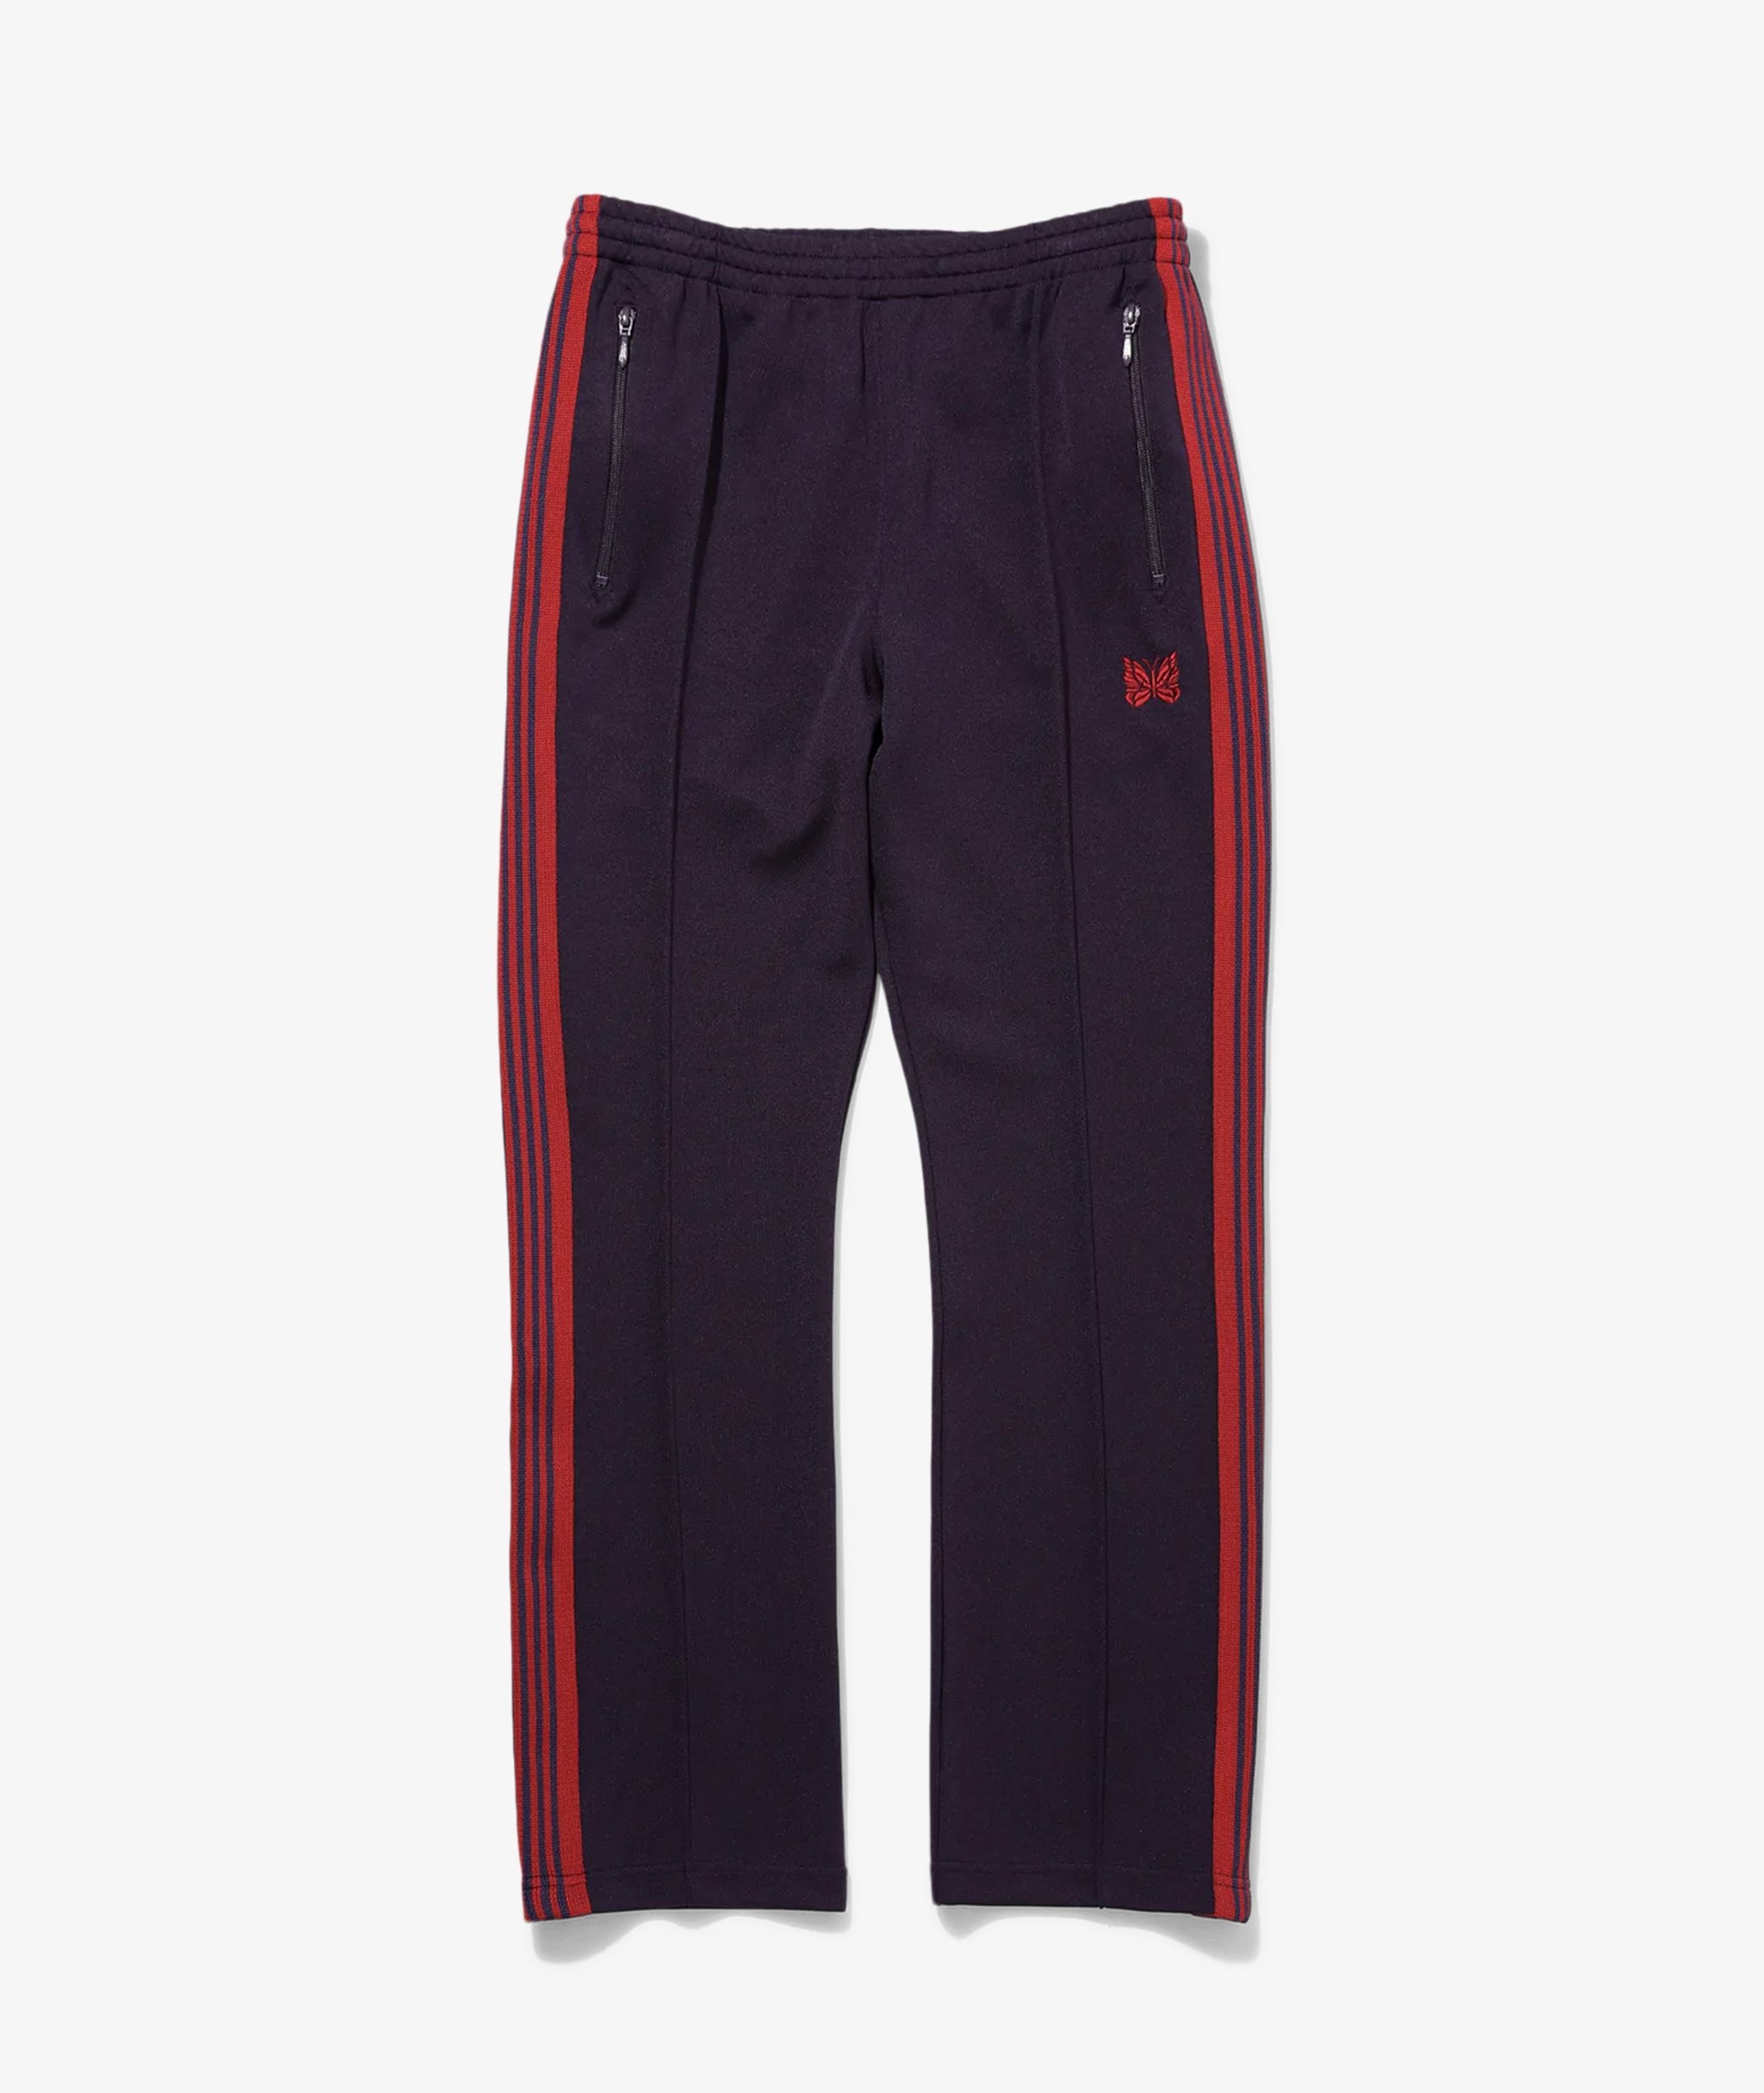 Norse Store | Shipping Worldwide - Needles Track Pant - Track Purple